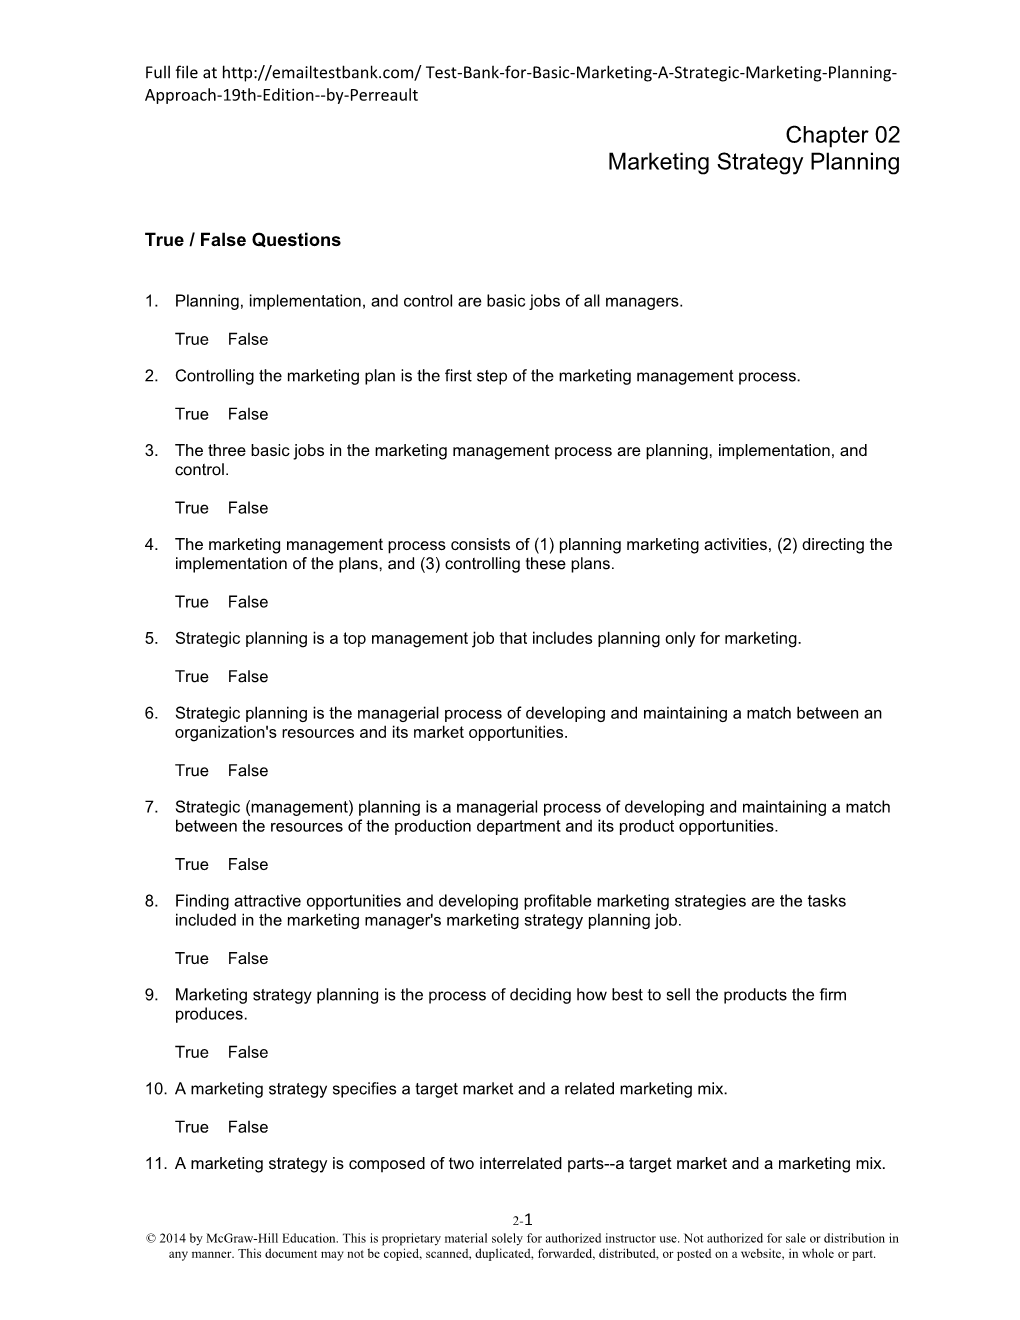 Full File at Test-Bank-For-Basic-Marketing-A-Strategic-Marketing-Planning-Approach-19Th-Edition